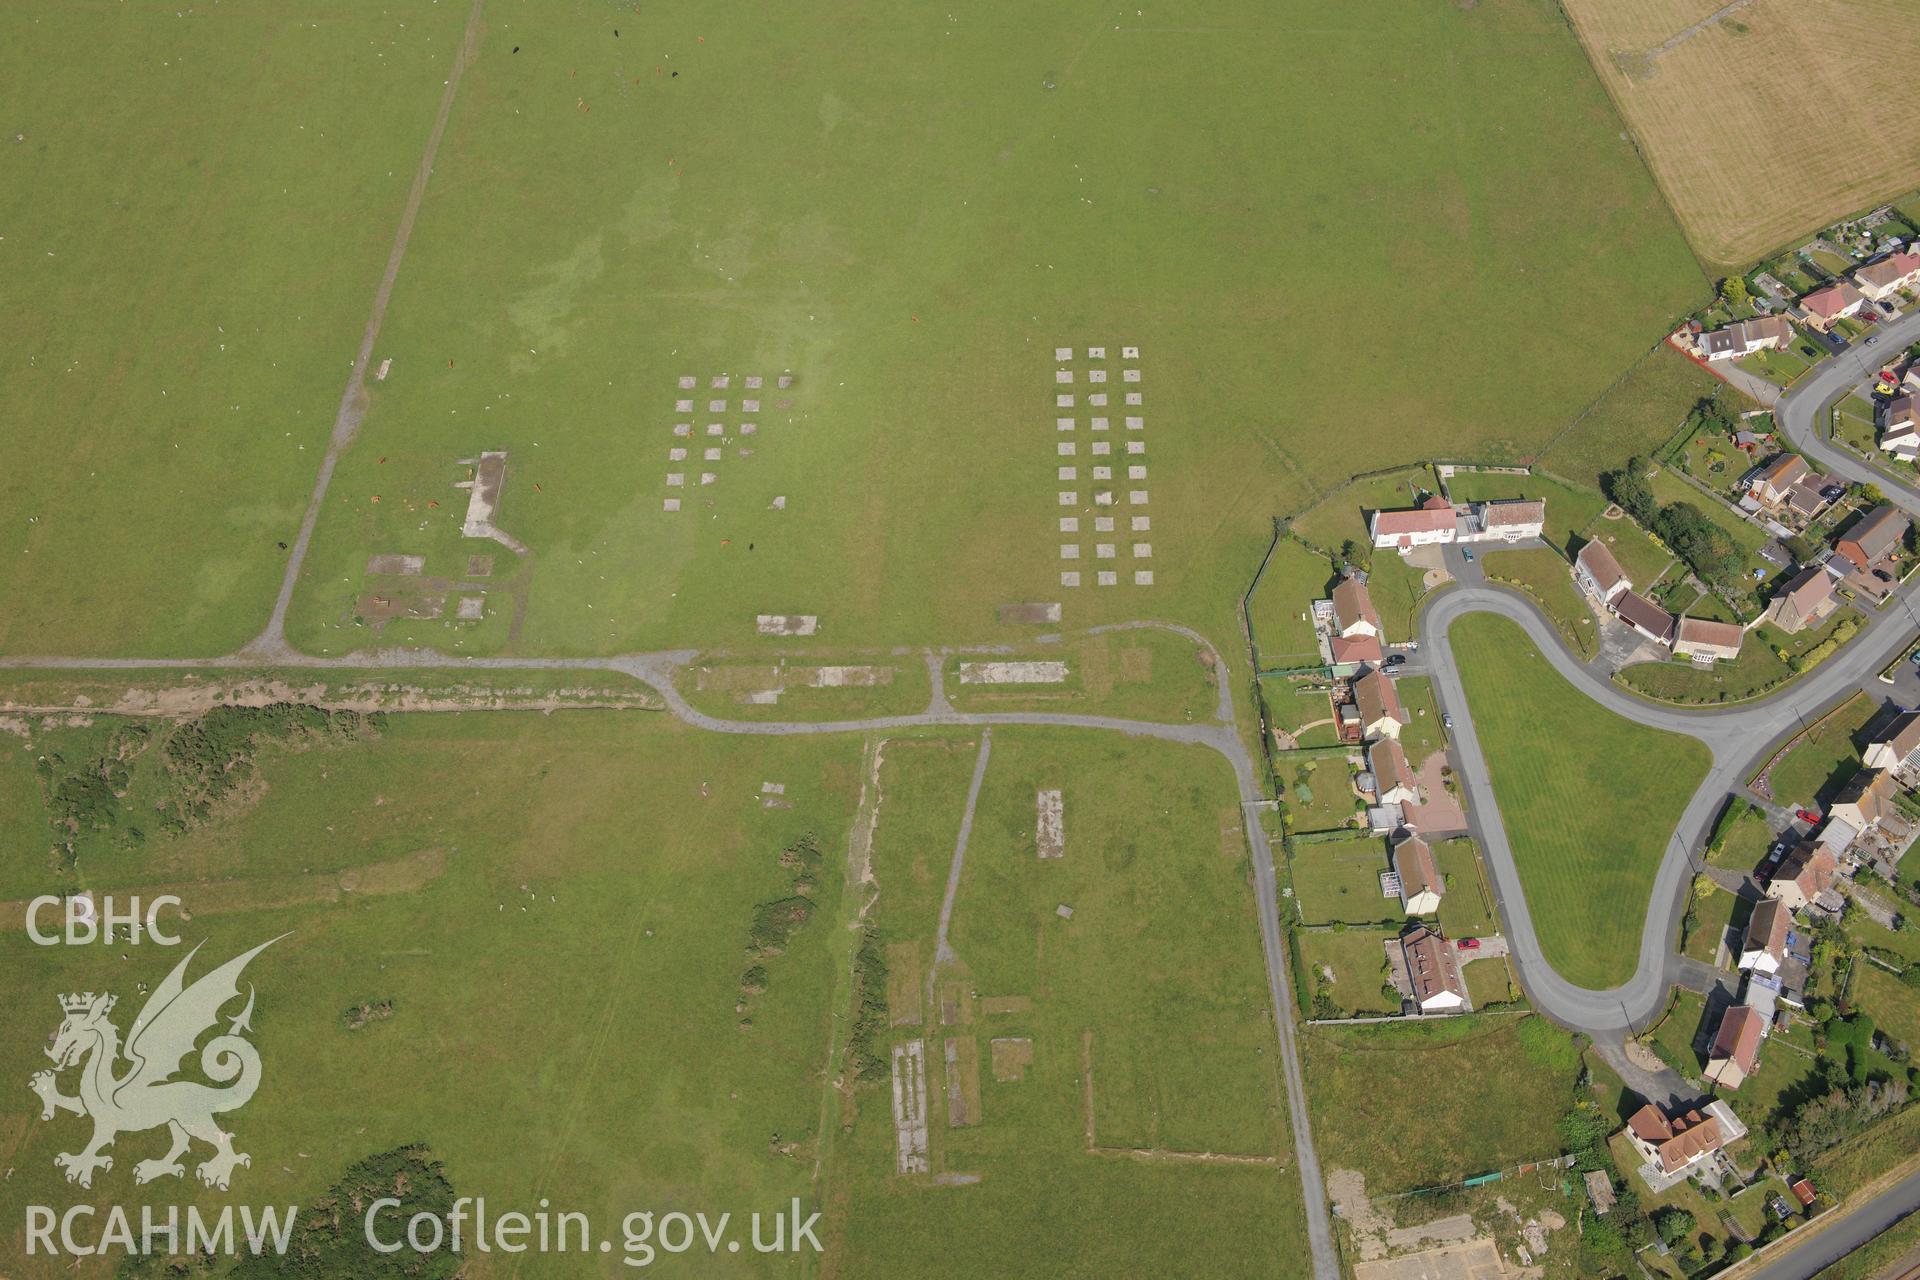 Tywyn airfield, the battle headquarters at Tywyn and the town of Tywyn. Oblique aerial photograph taken during RCAHMW?s programme of archaeological aerial reconnaissance by Toby Driver, 12th July 2013.